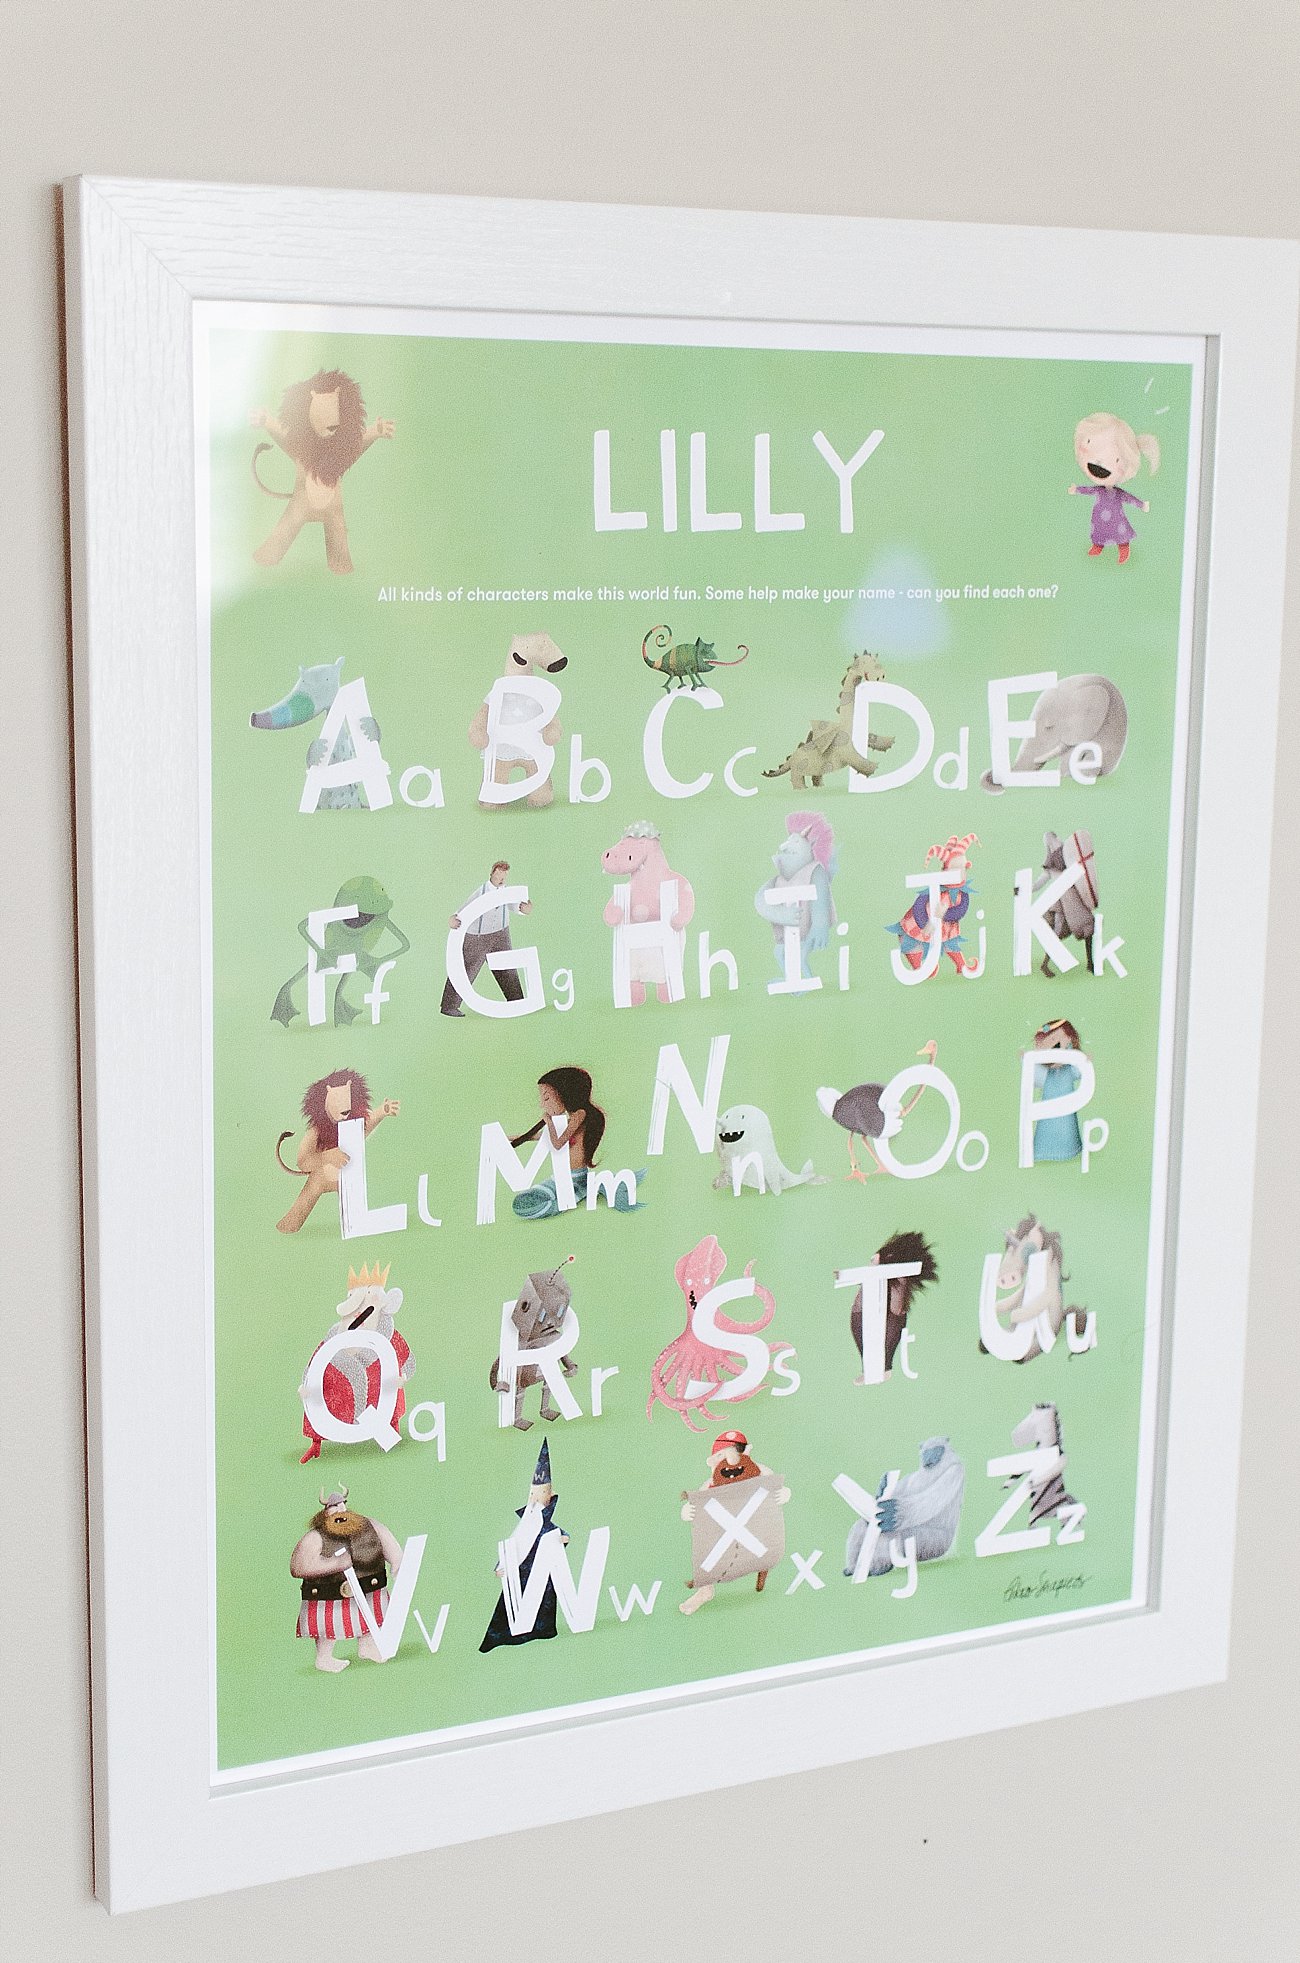 Lost My Name - Custom Children's Books, Alphabet Posters, Review and Giveaway (16)